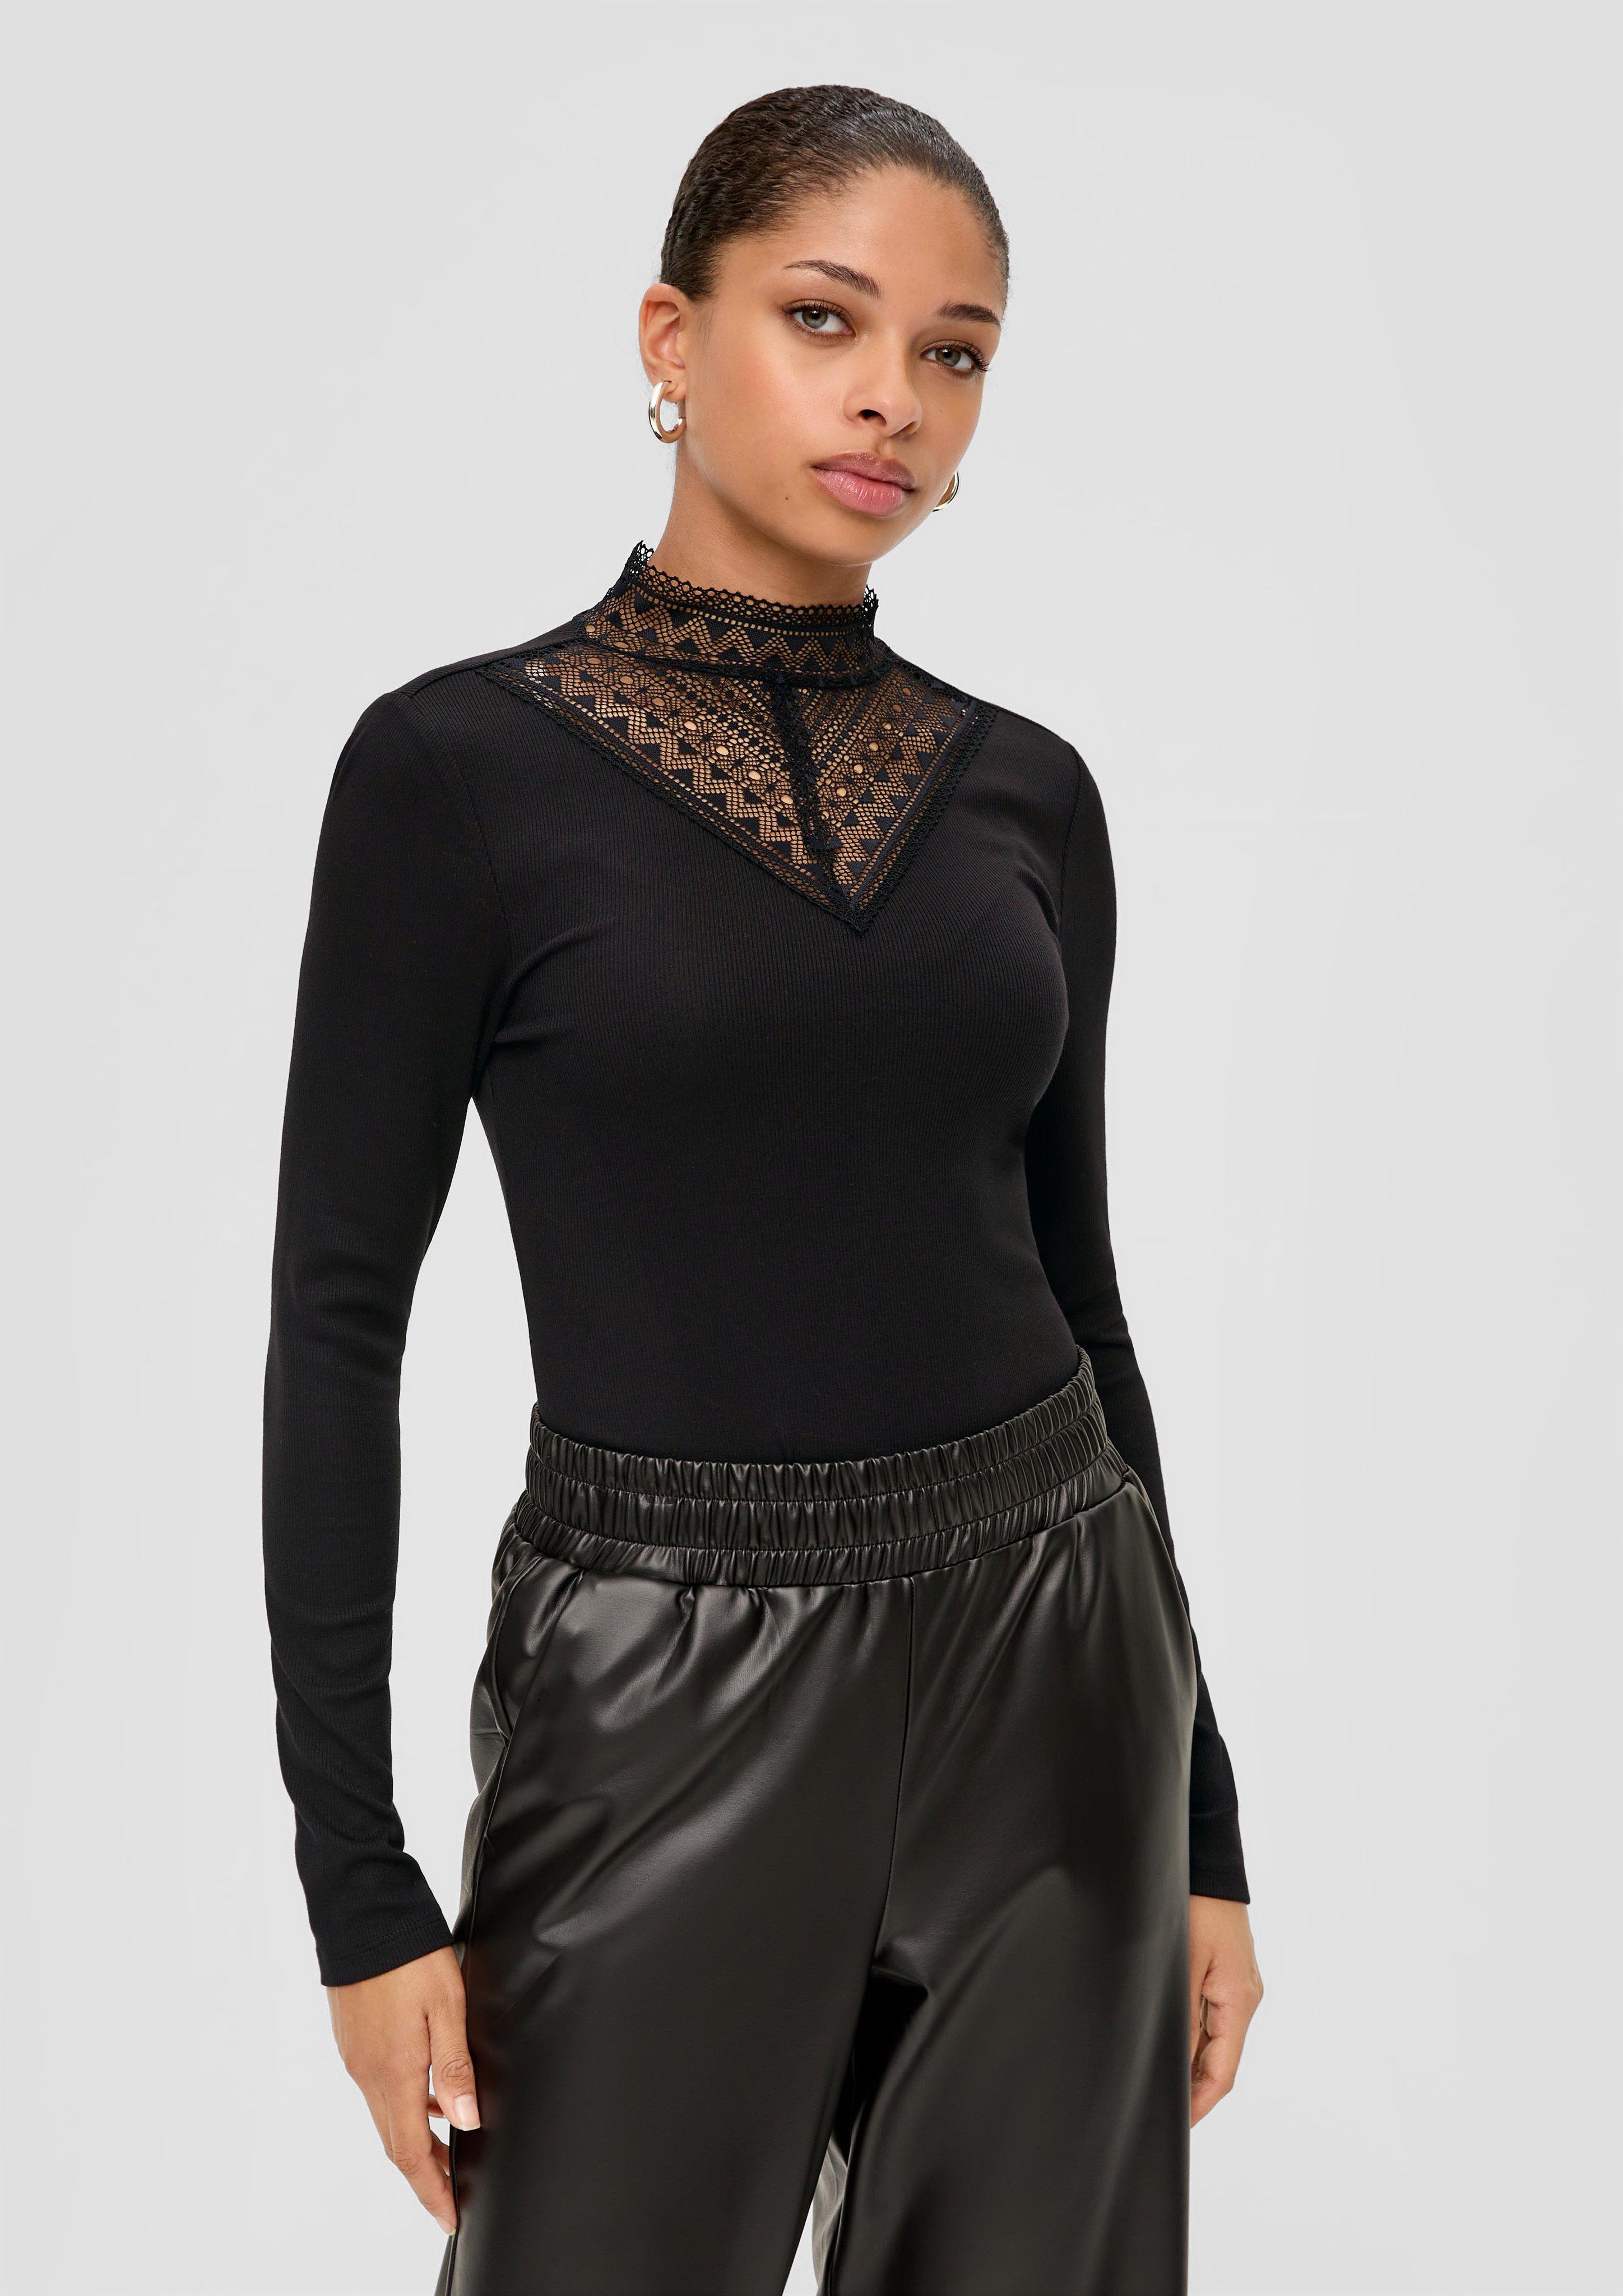 - long top sleeve lace Ribbed black insert a with